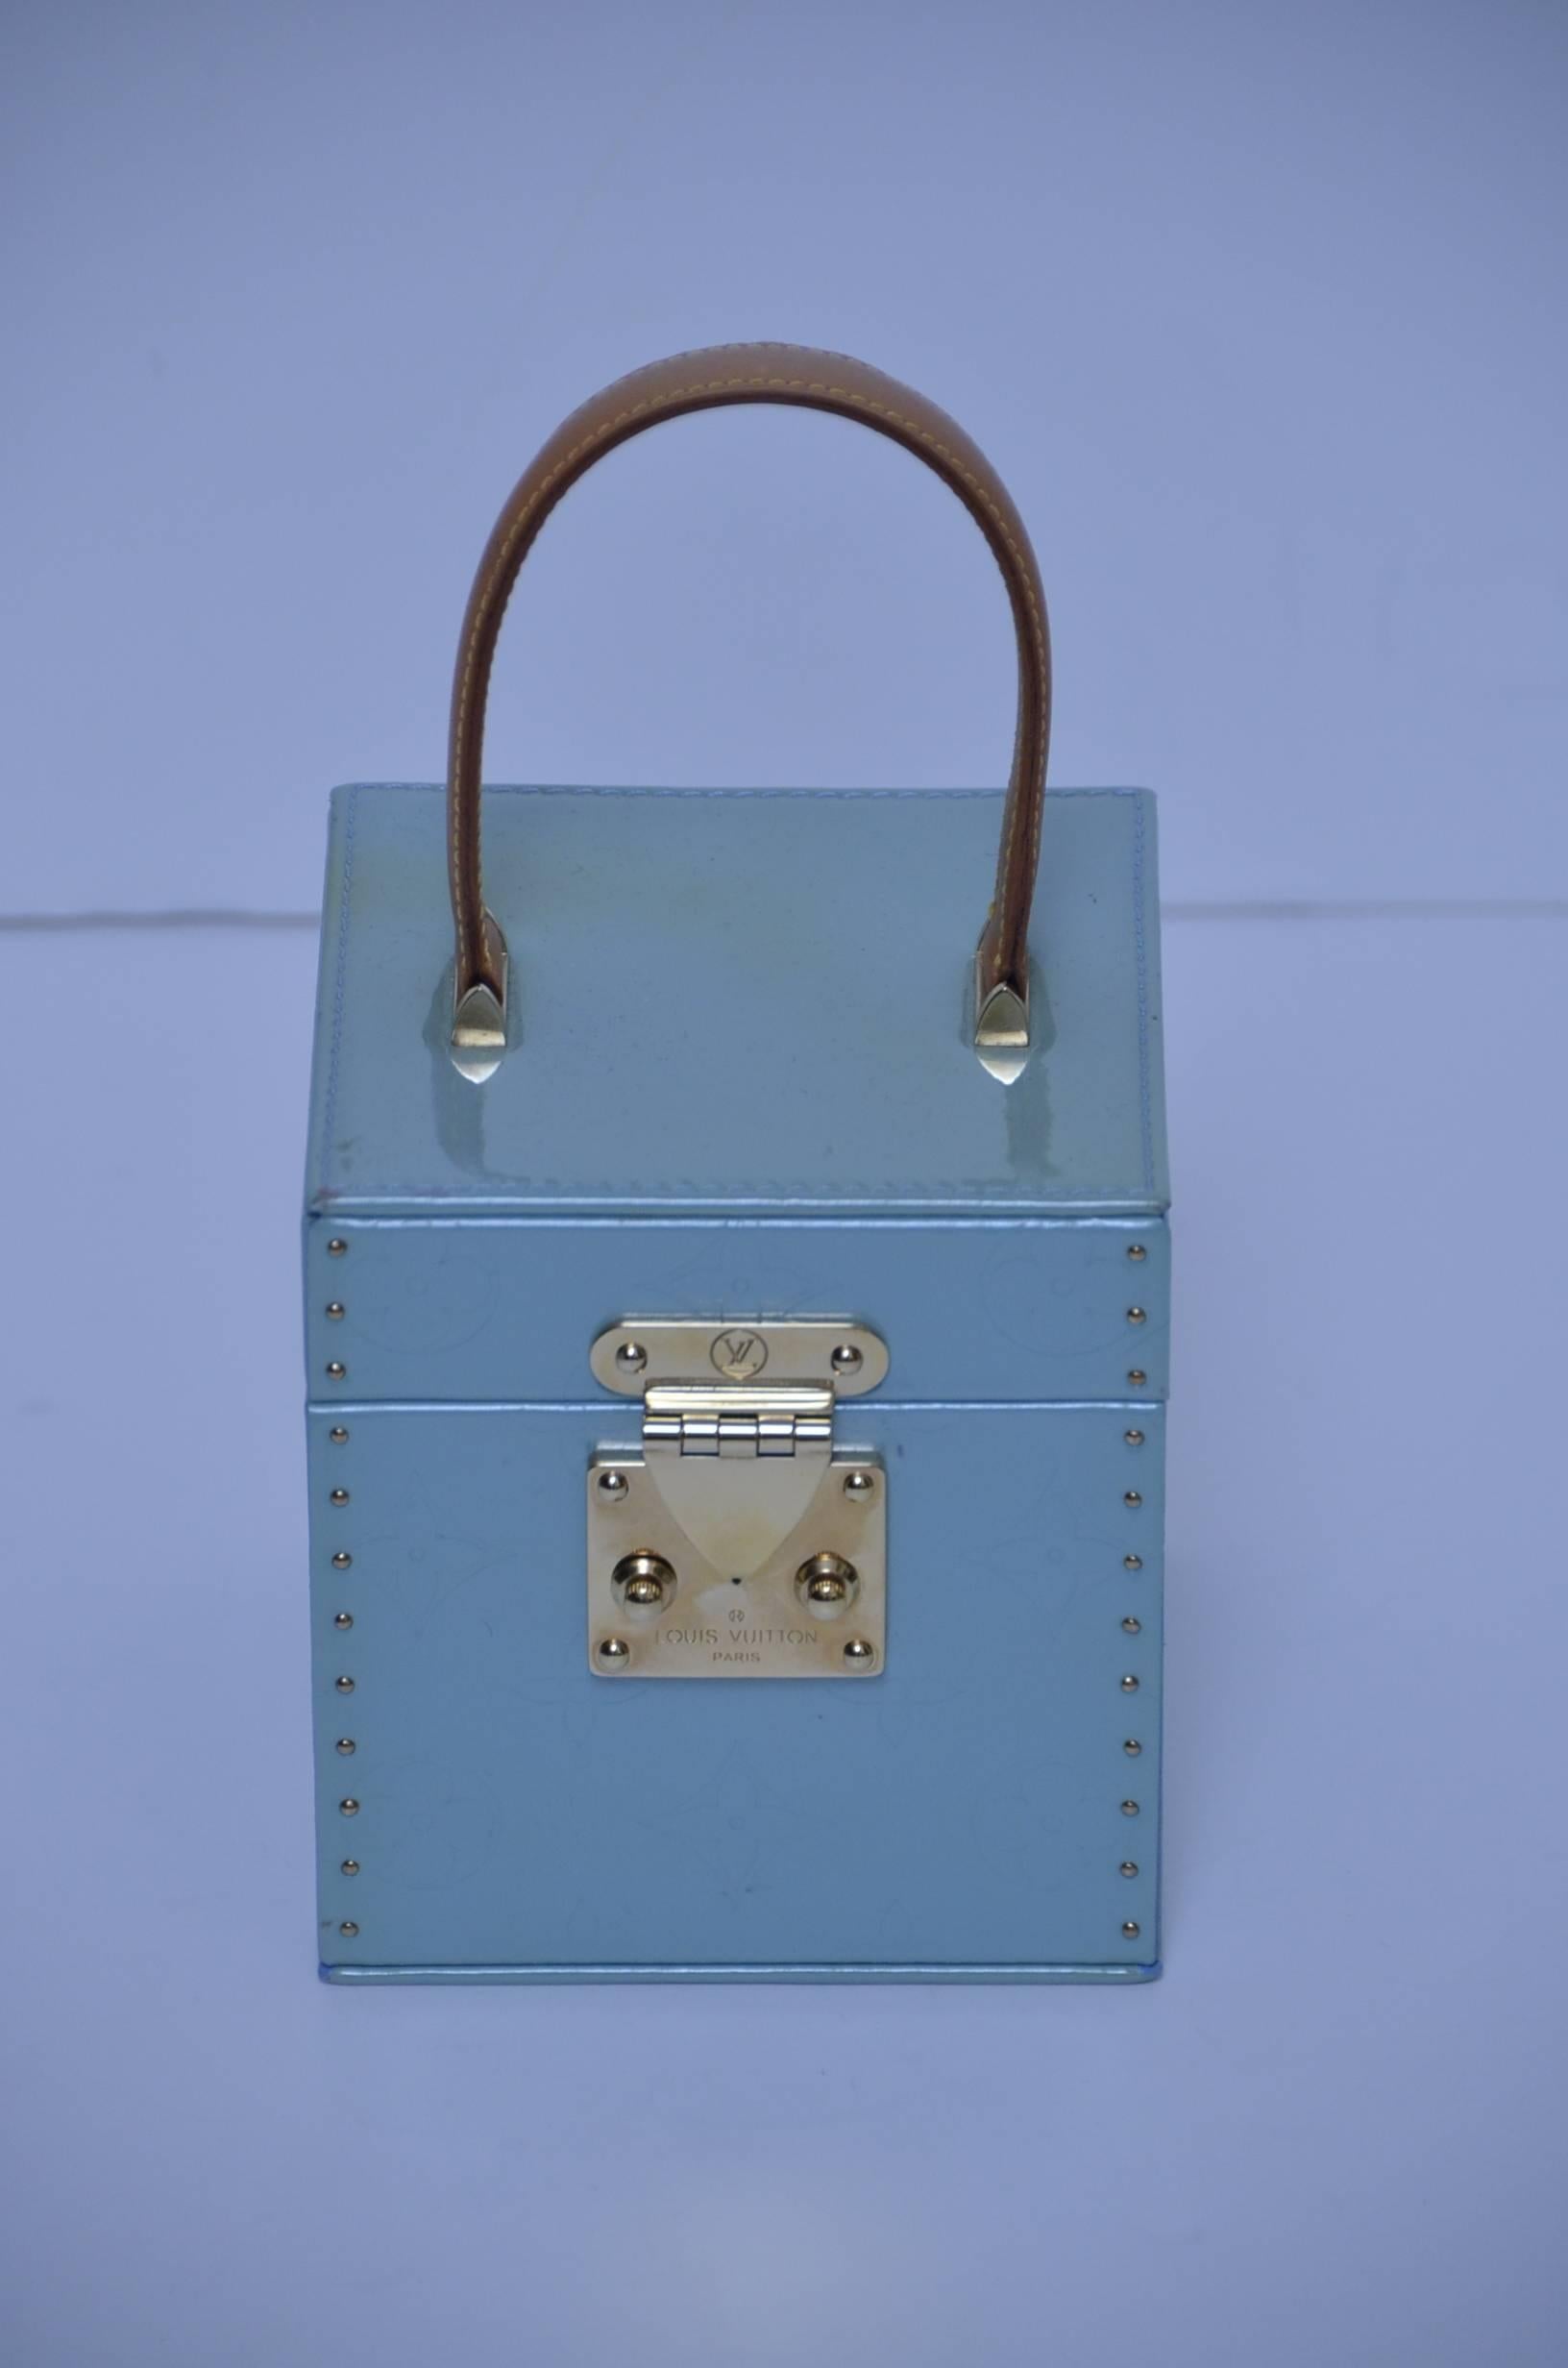 Rare Discontinued Louis Vuitton Mint Green Vernis Bleecker Mini Trunk Clutch Box
Mint light blue Vernis leather exterior mini trunk.
Mint blue interior with a mirror
Made in France
Limited Release from around 1998
Dimensions: